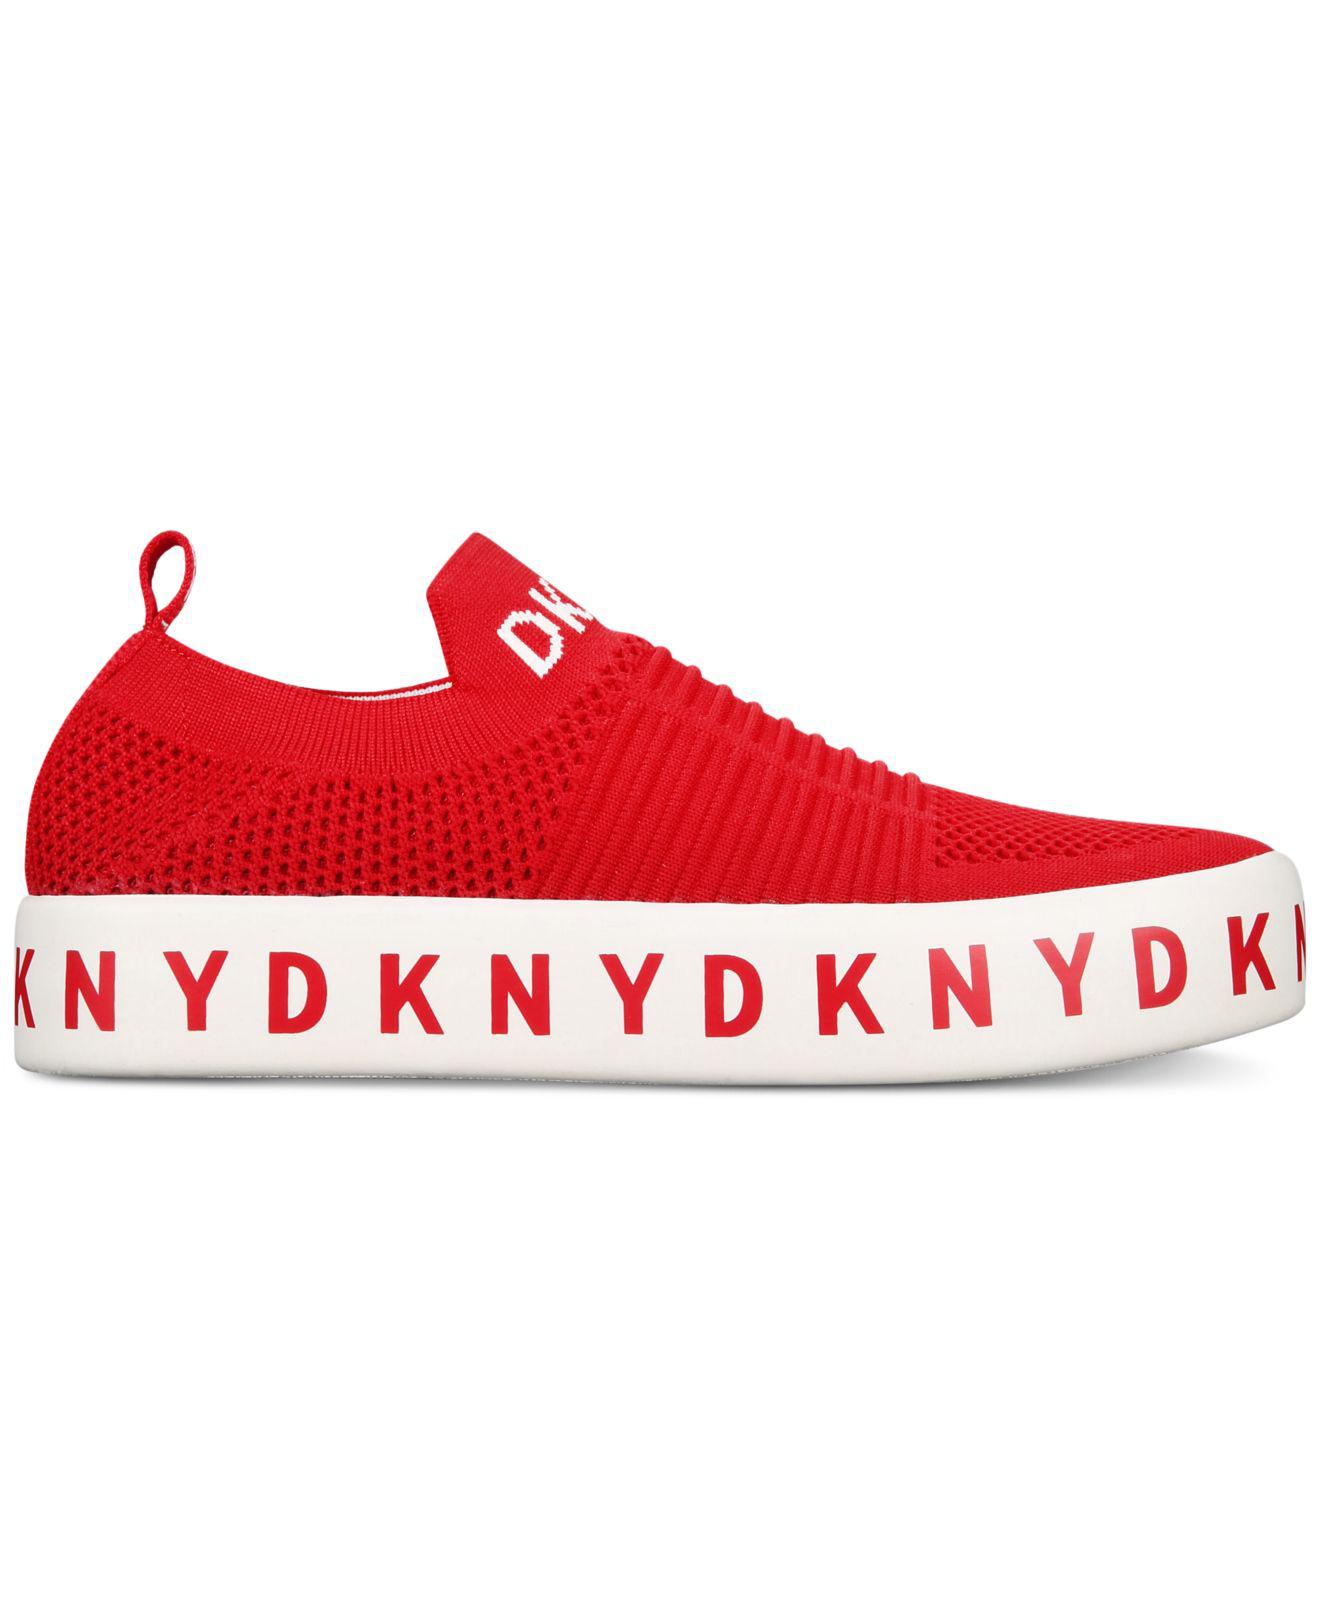 dkny shoes red